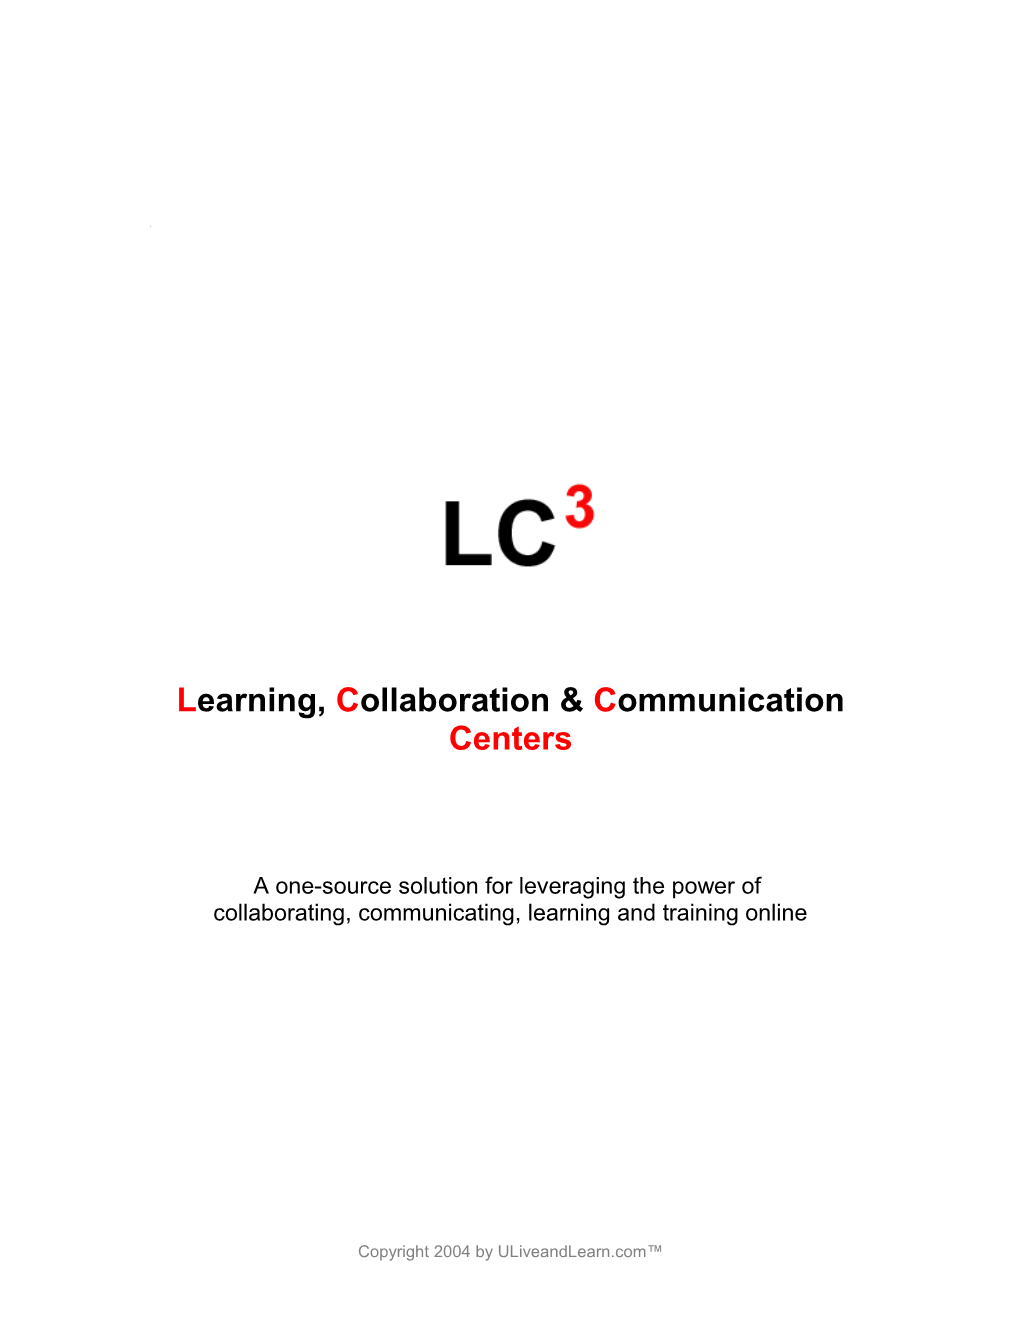 Learning, Collaborationcommunication Centers